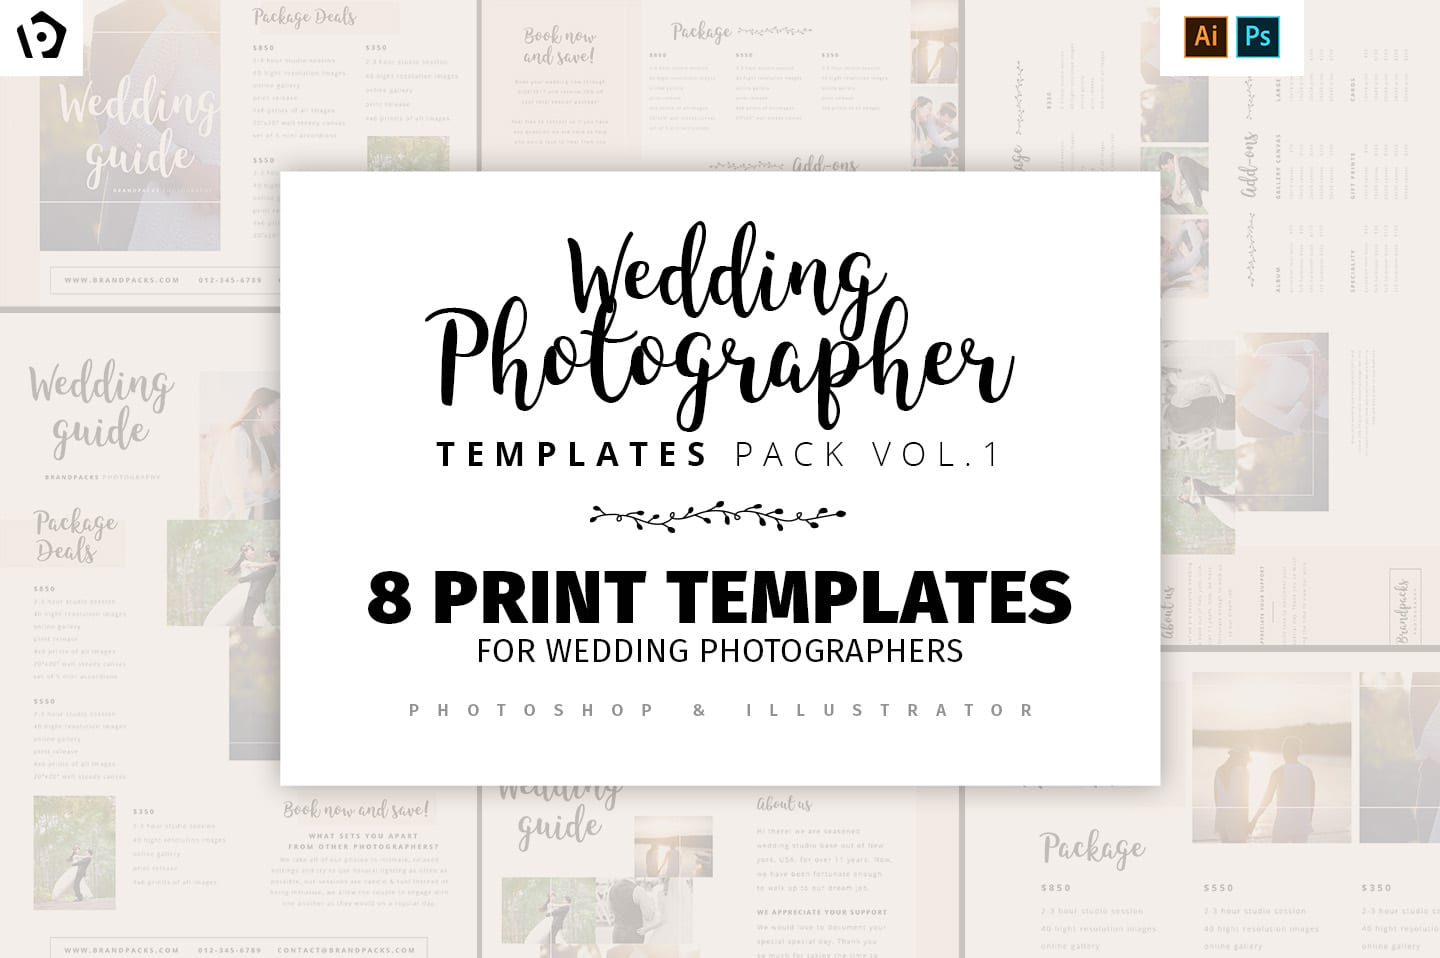 Wedding Photography Templates Pack